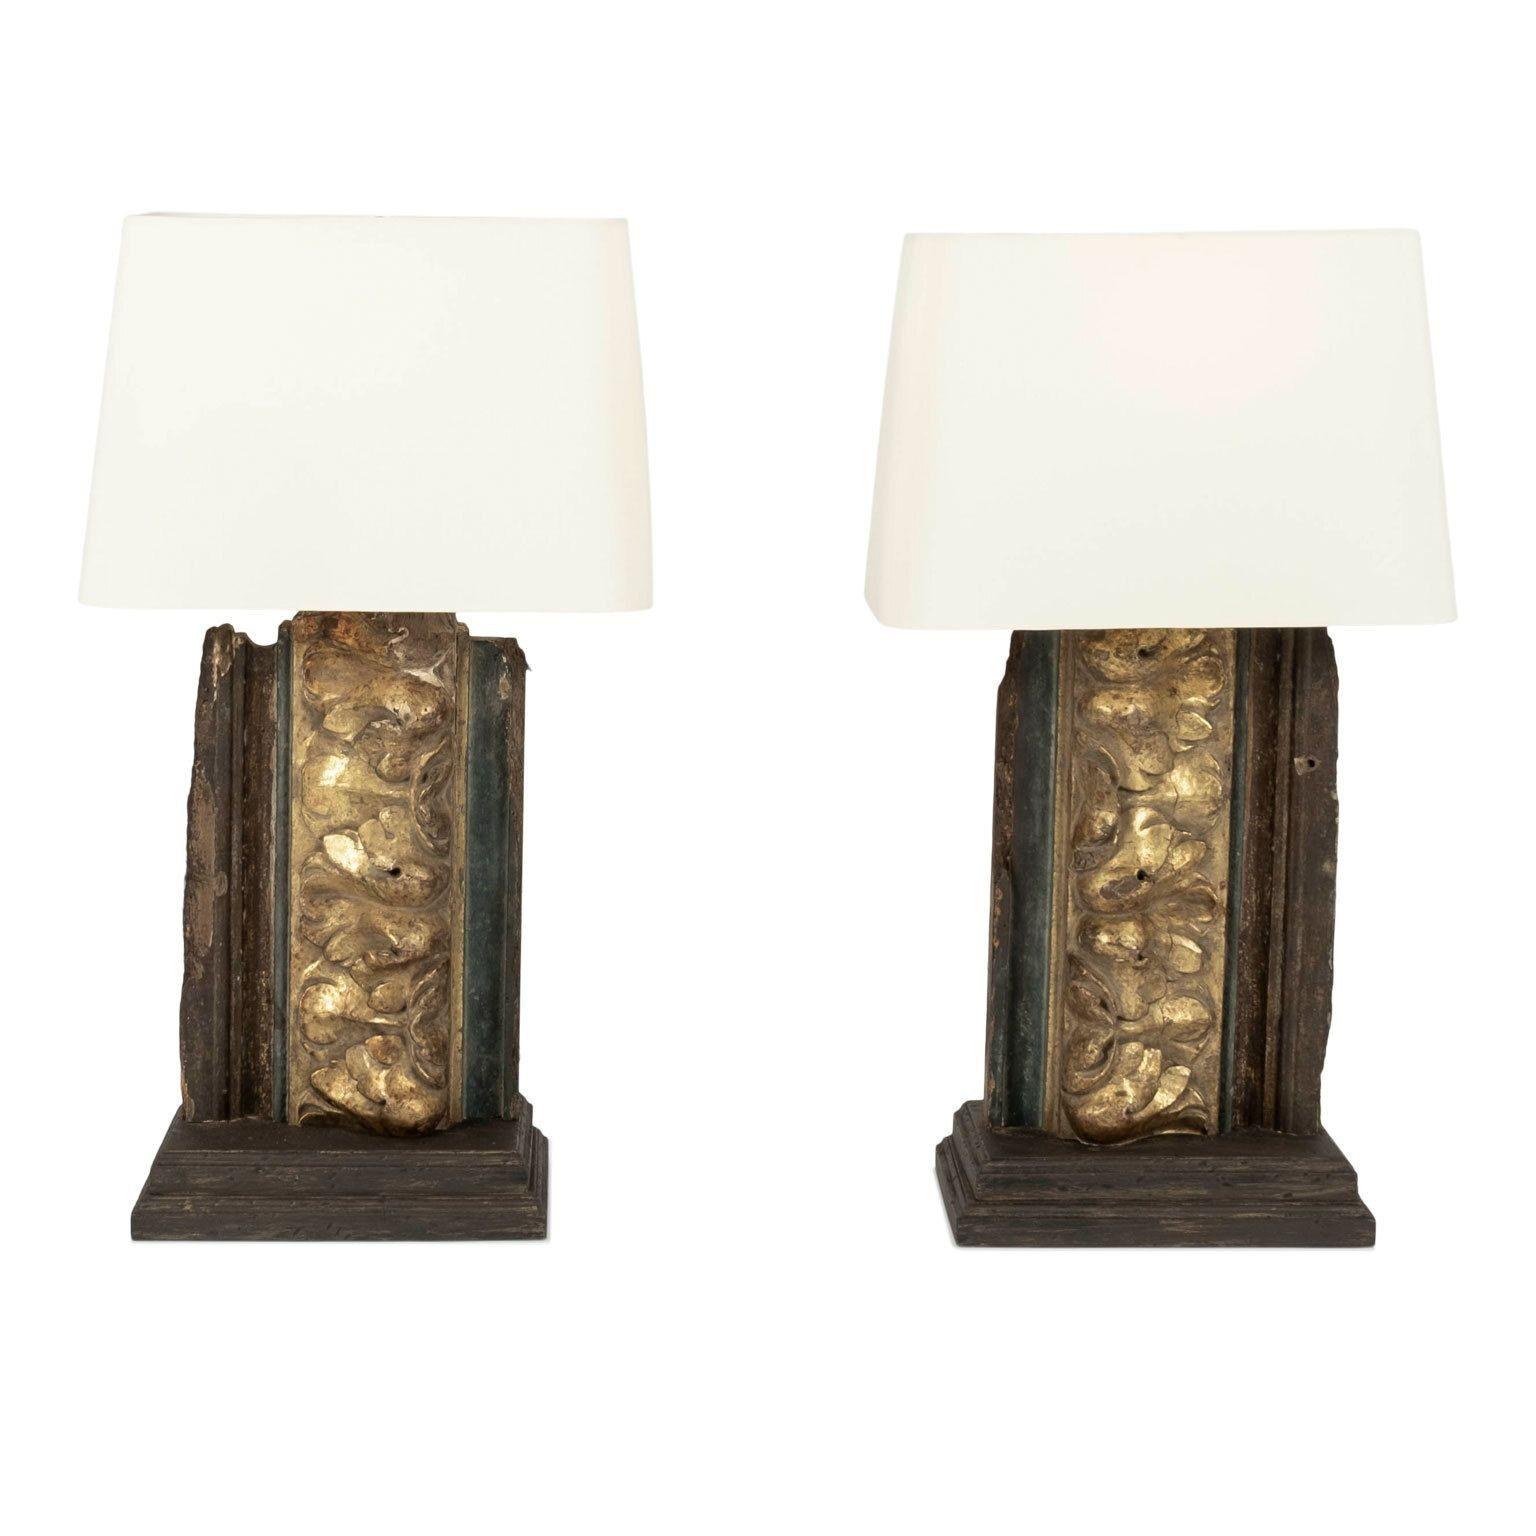 Pair of Giltwood Architectural Fragment Lamps For Sale 2